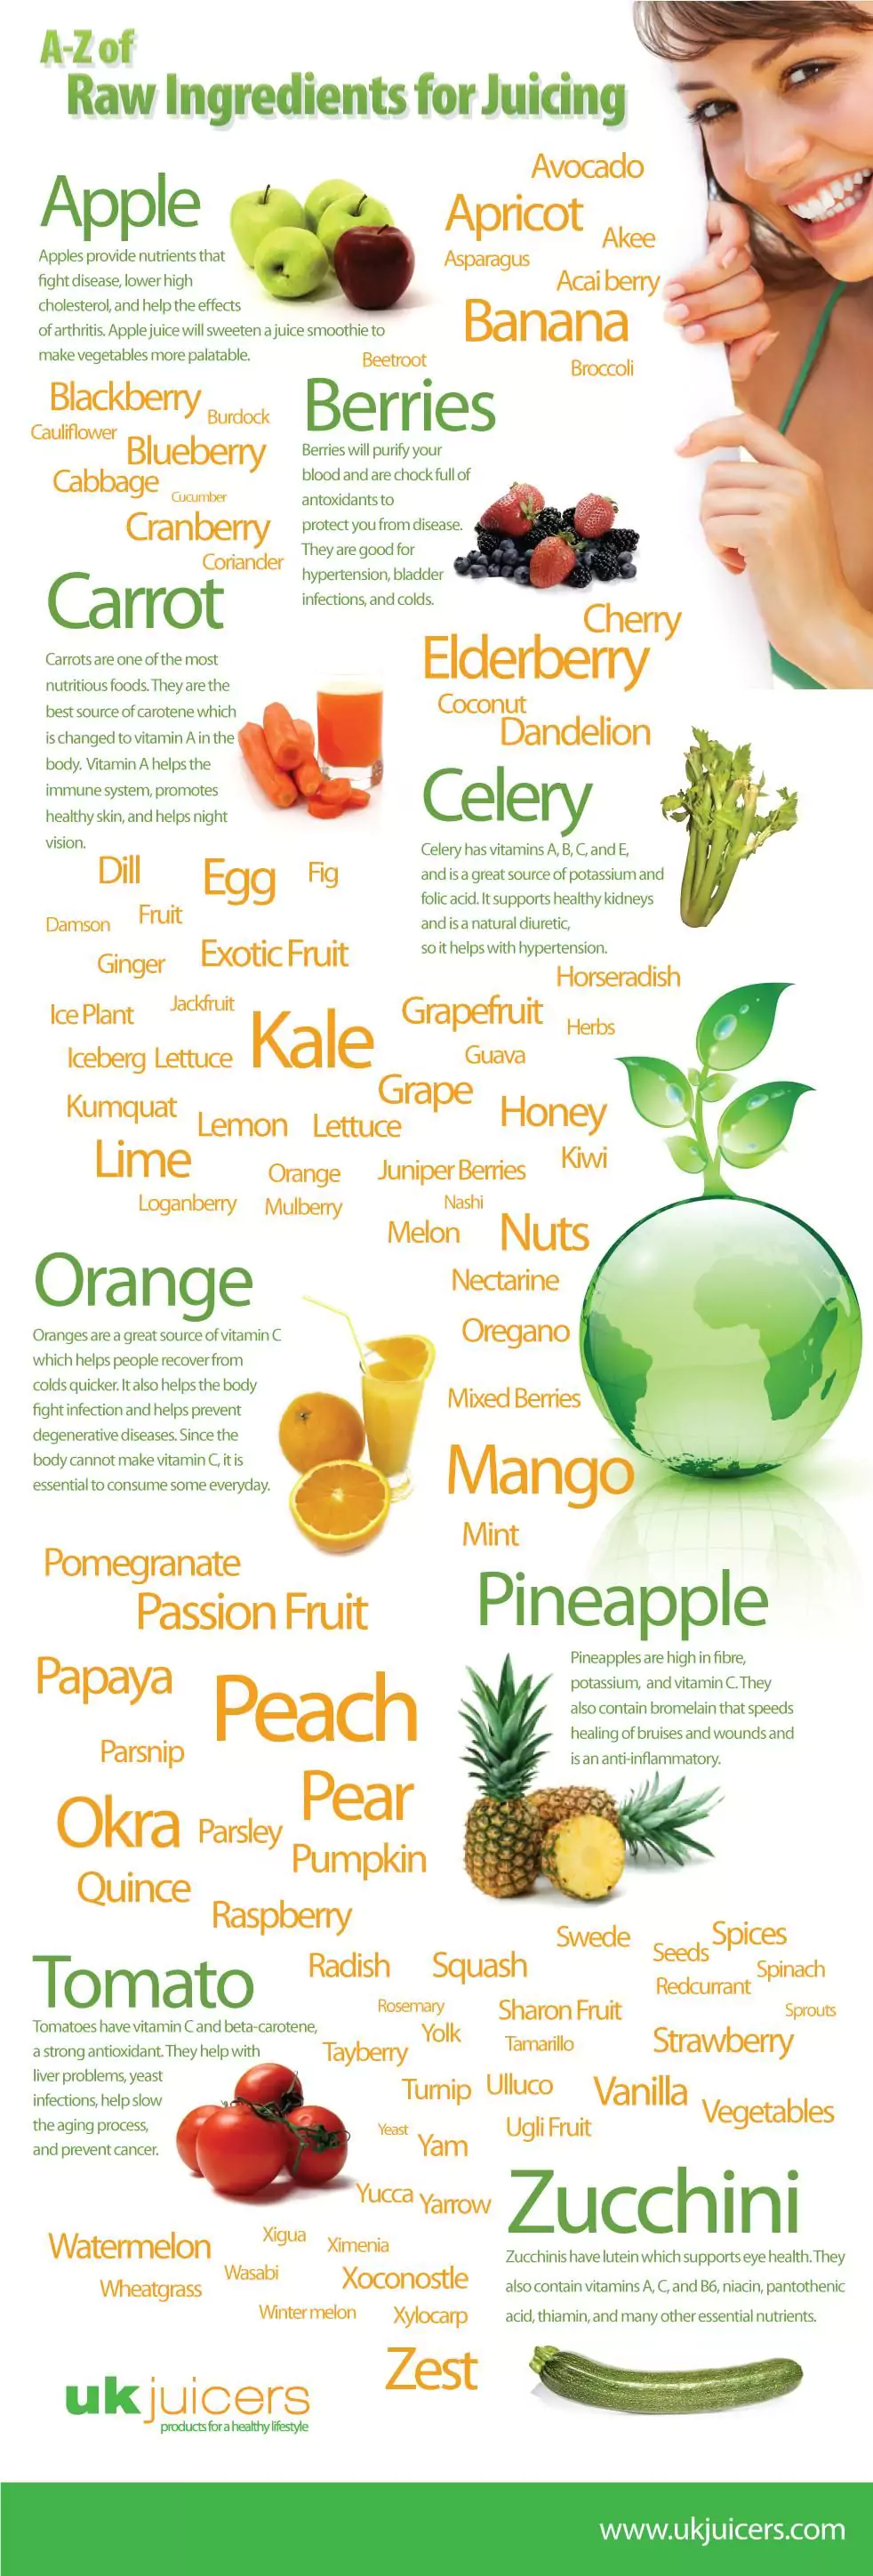 A-Z Of Raw Ingredients For Juicing